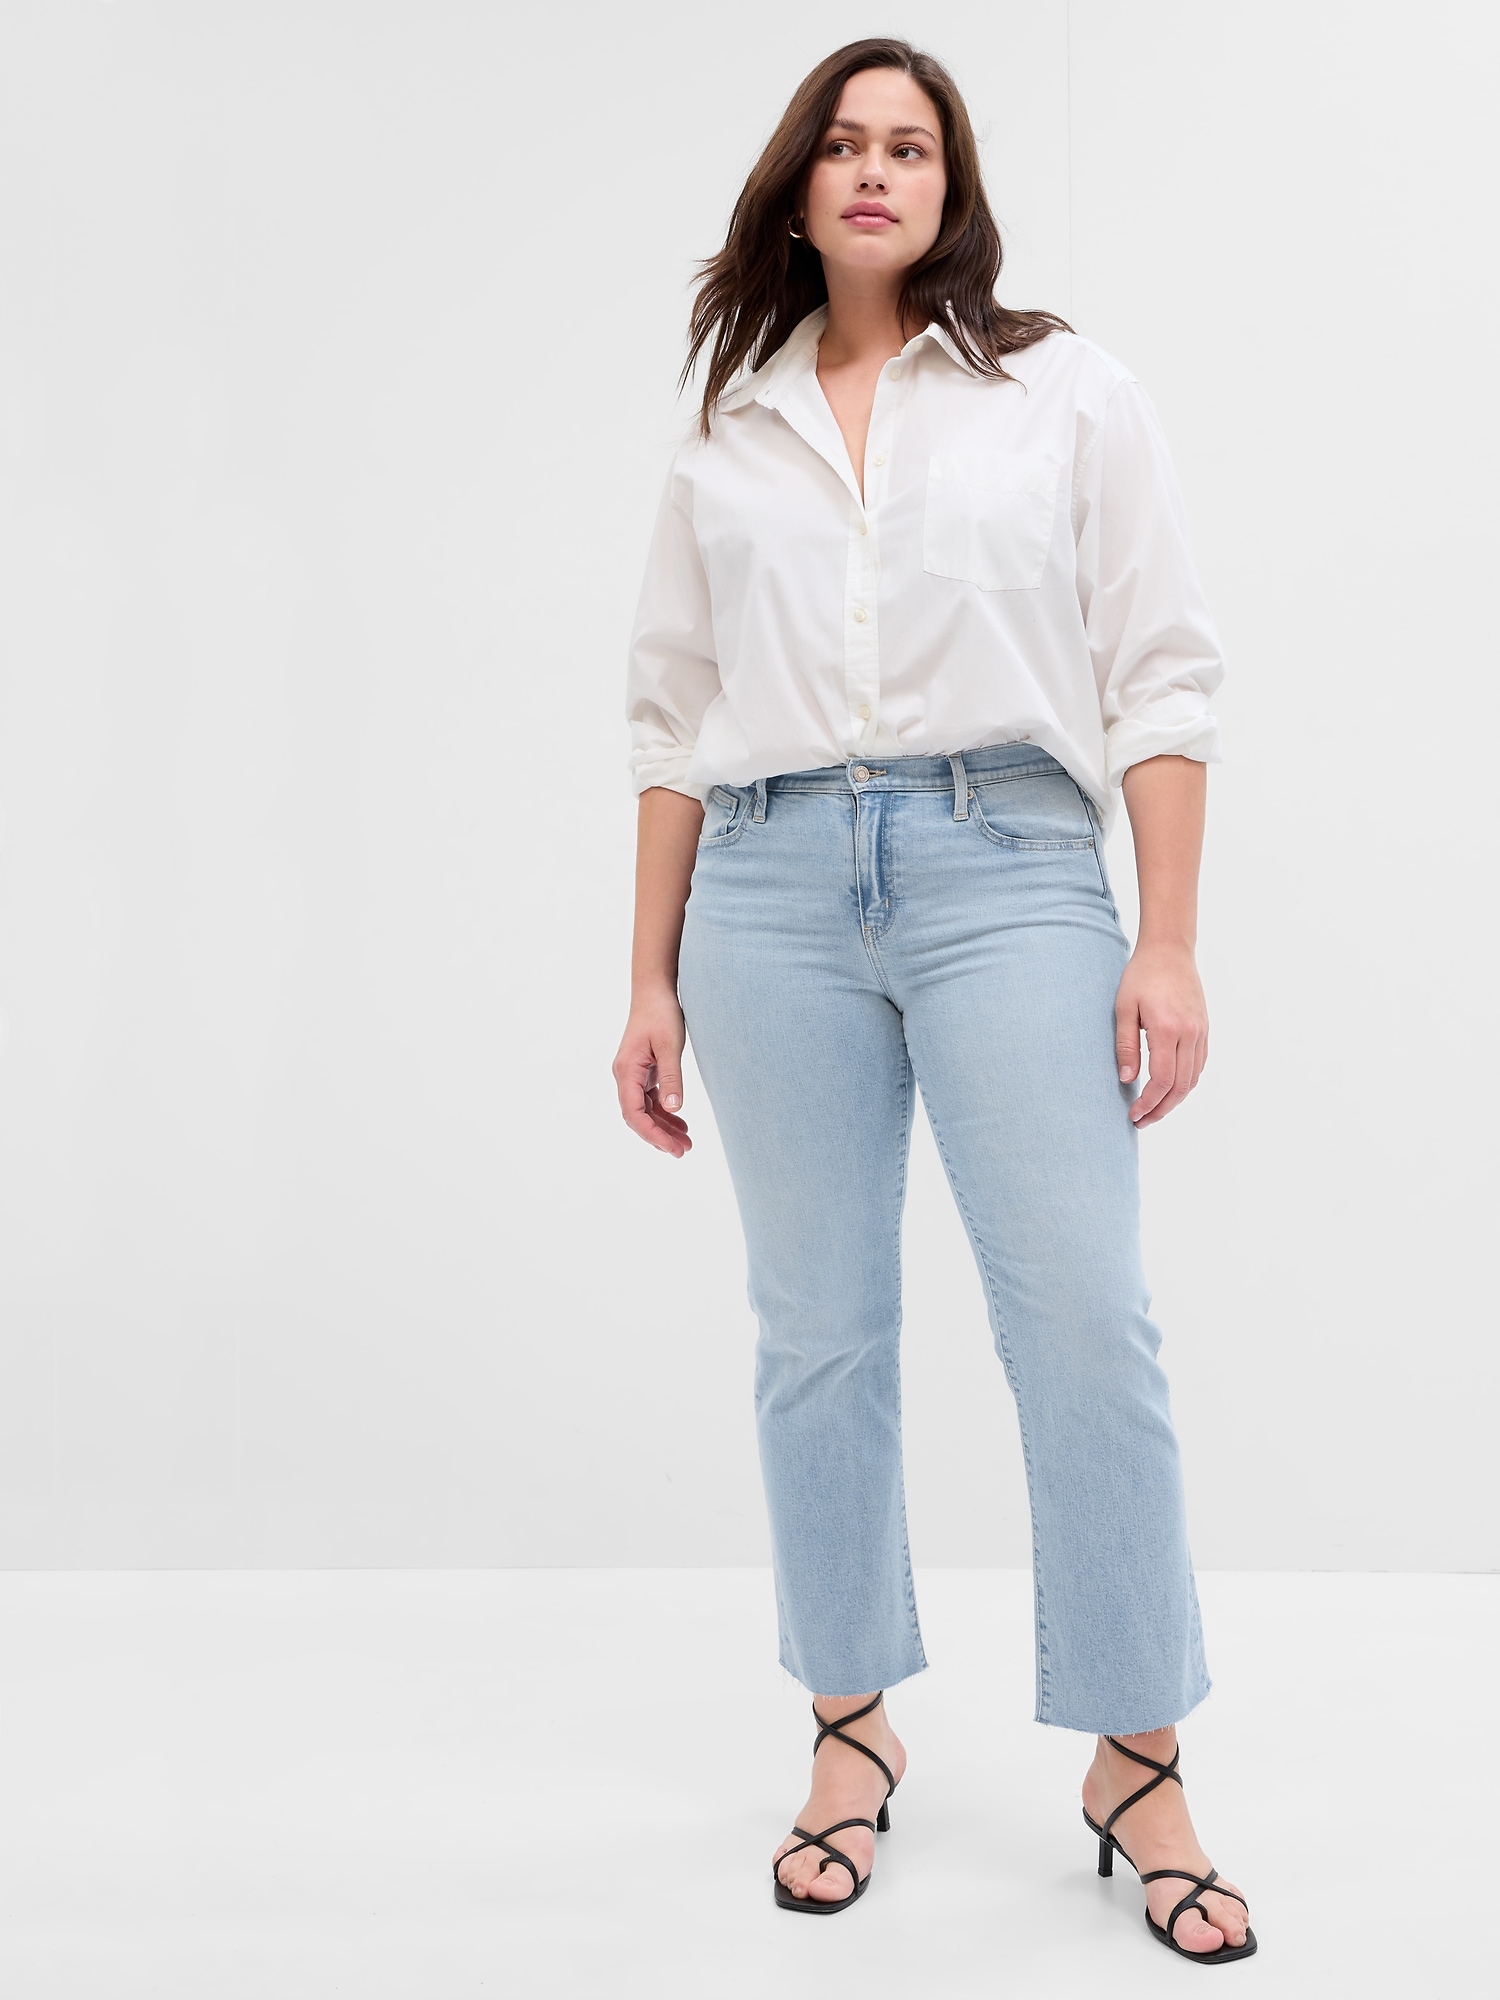 Buy Gap Low Rise Flare Jeans from the Gap online shop